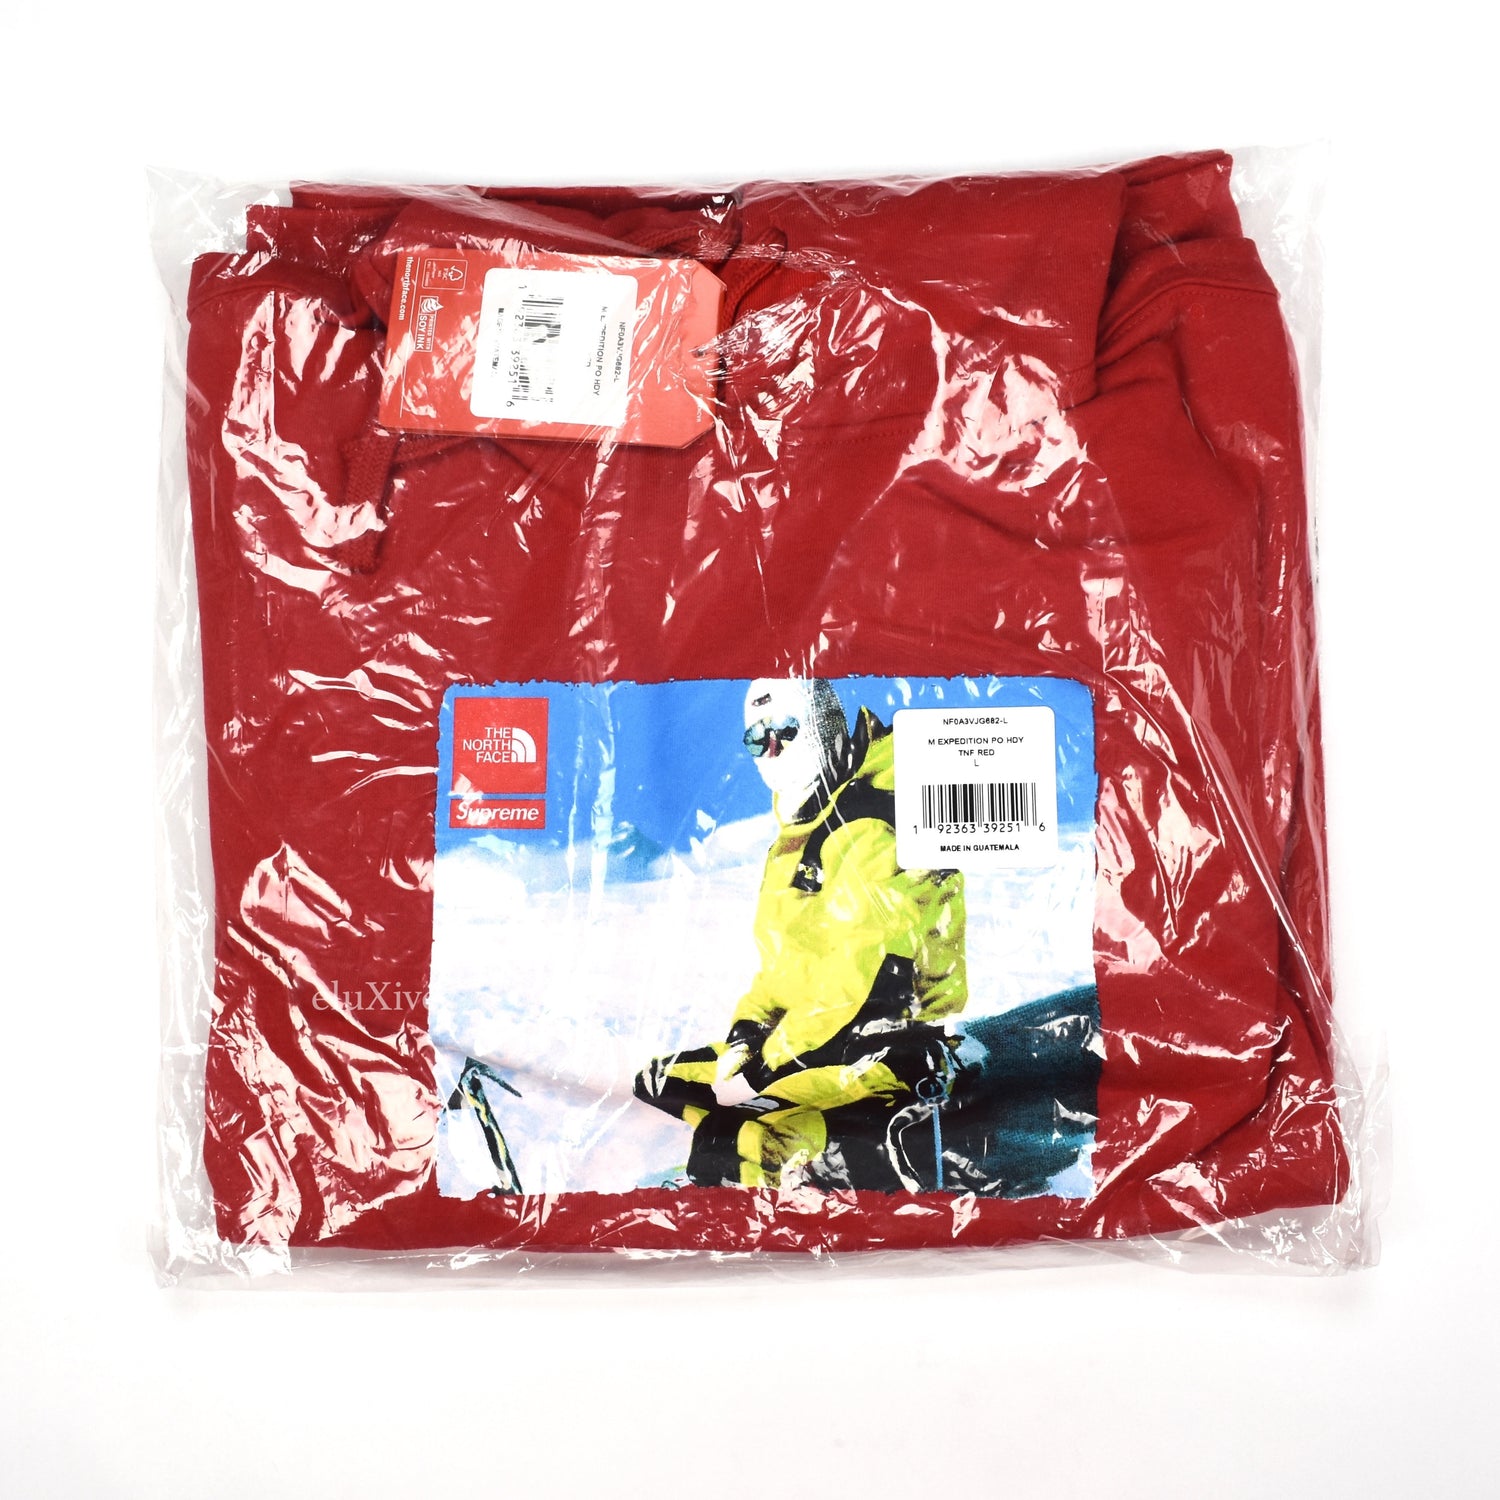 Buy Supreme x The North Face Photo Hooded Sweatshirt 'Red' - FW18SW5 RED